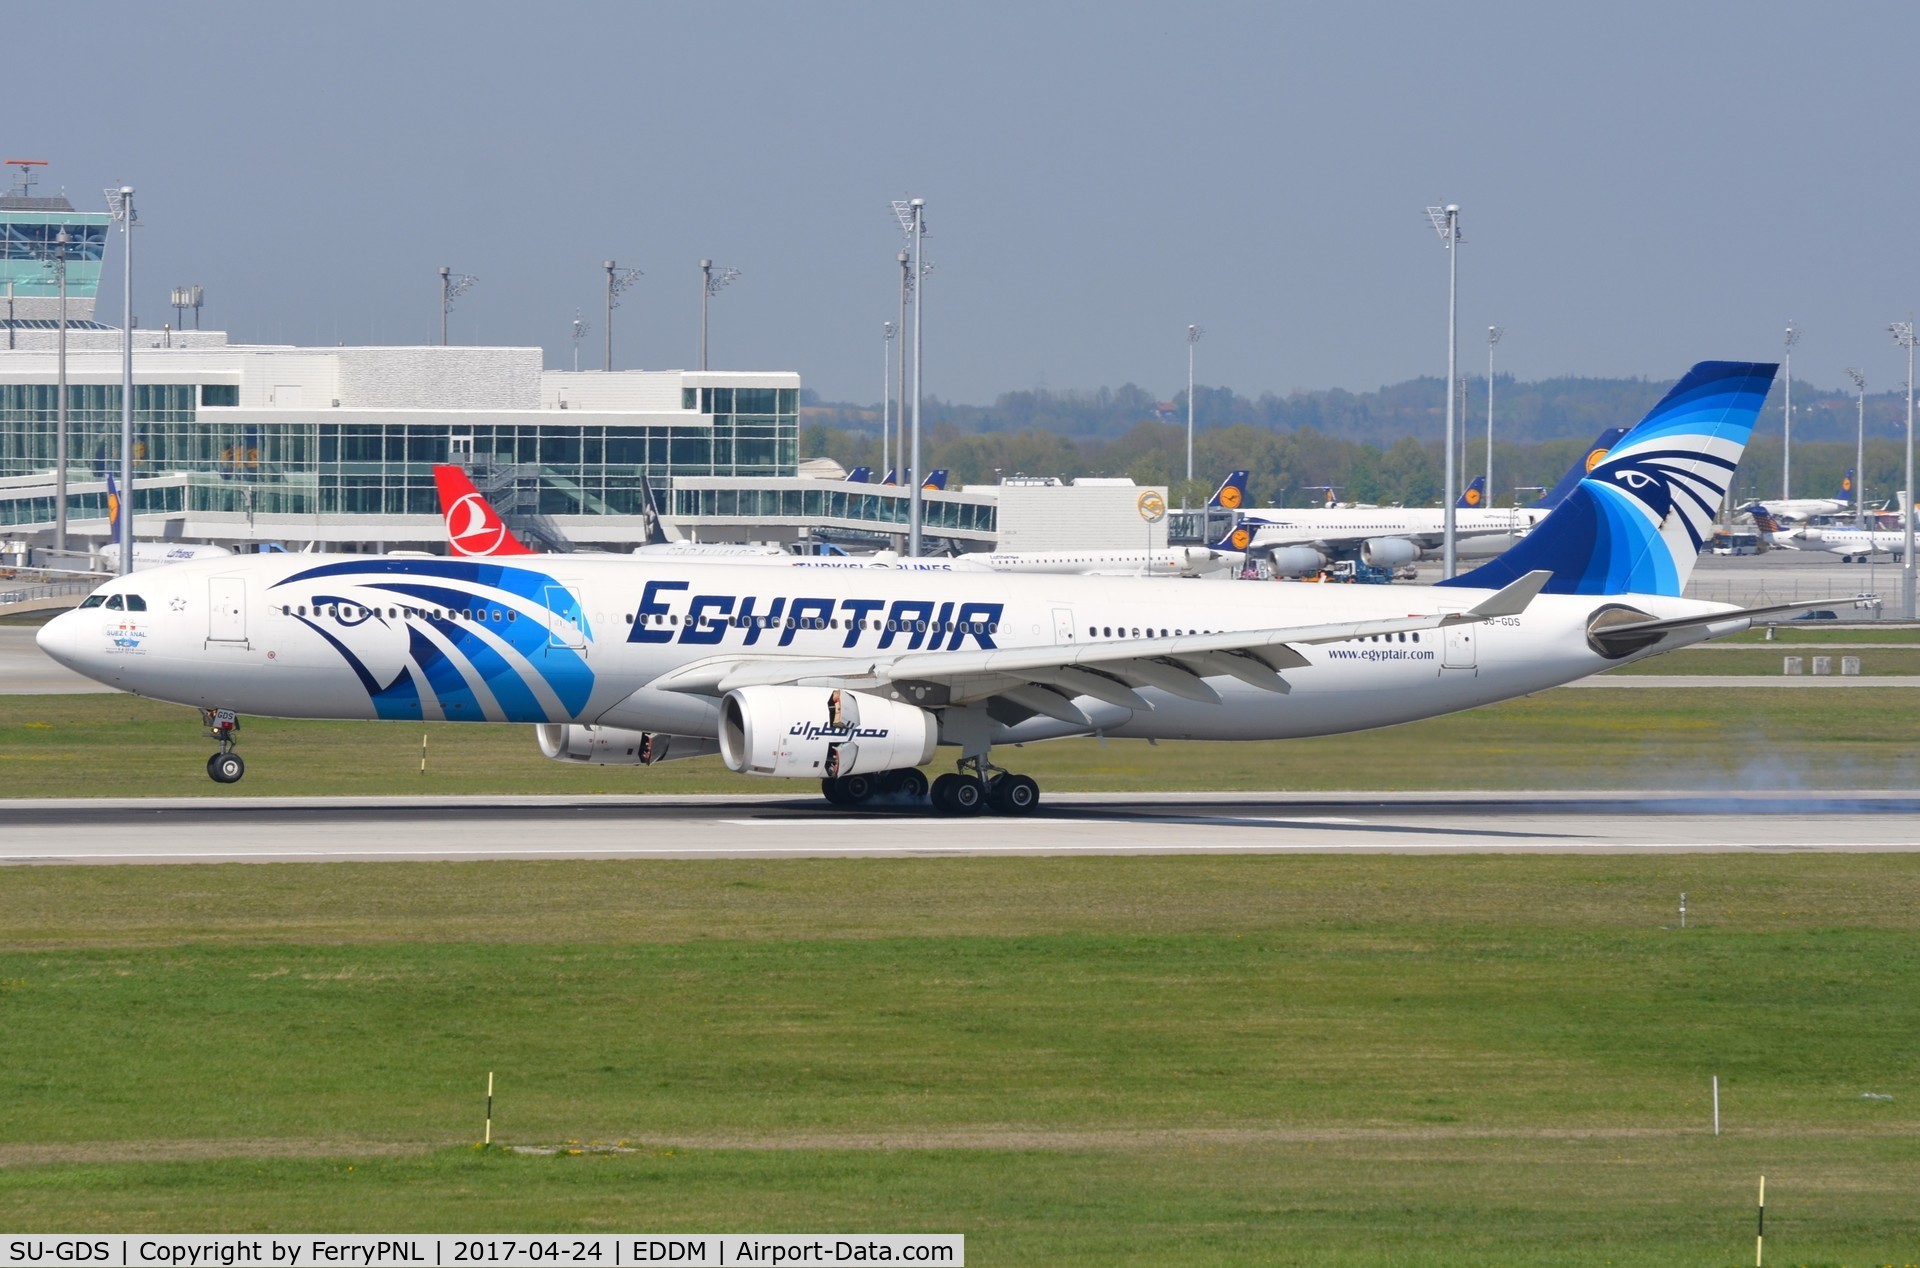 SU-GDS, 2010 Airbus A330-343X C/N 1143, Arrival of Egyptair A333 from CAI.